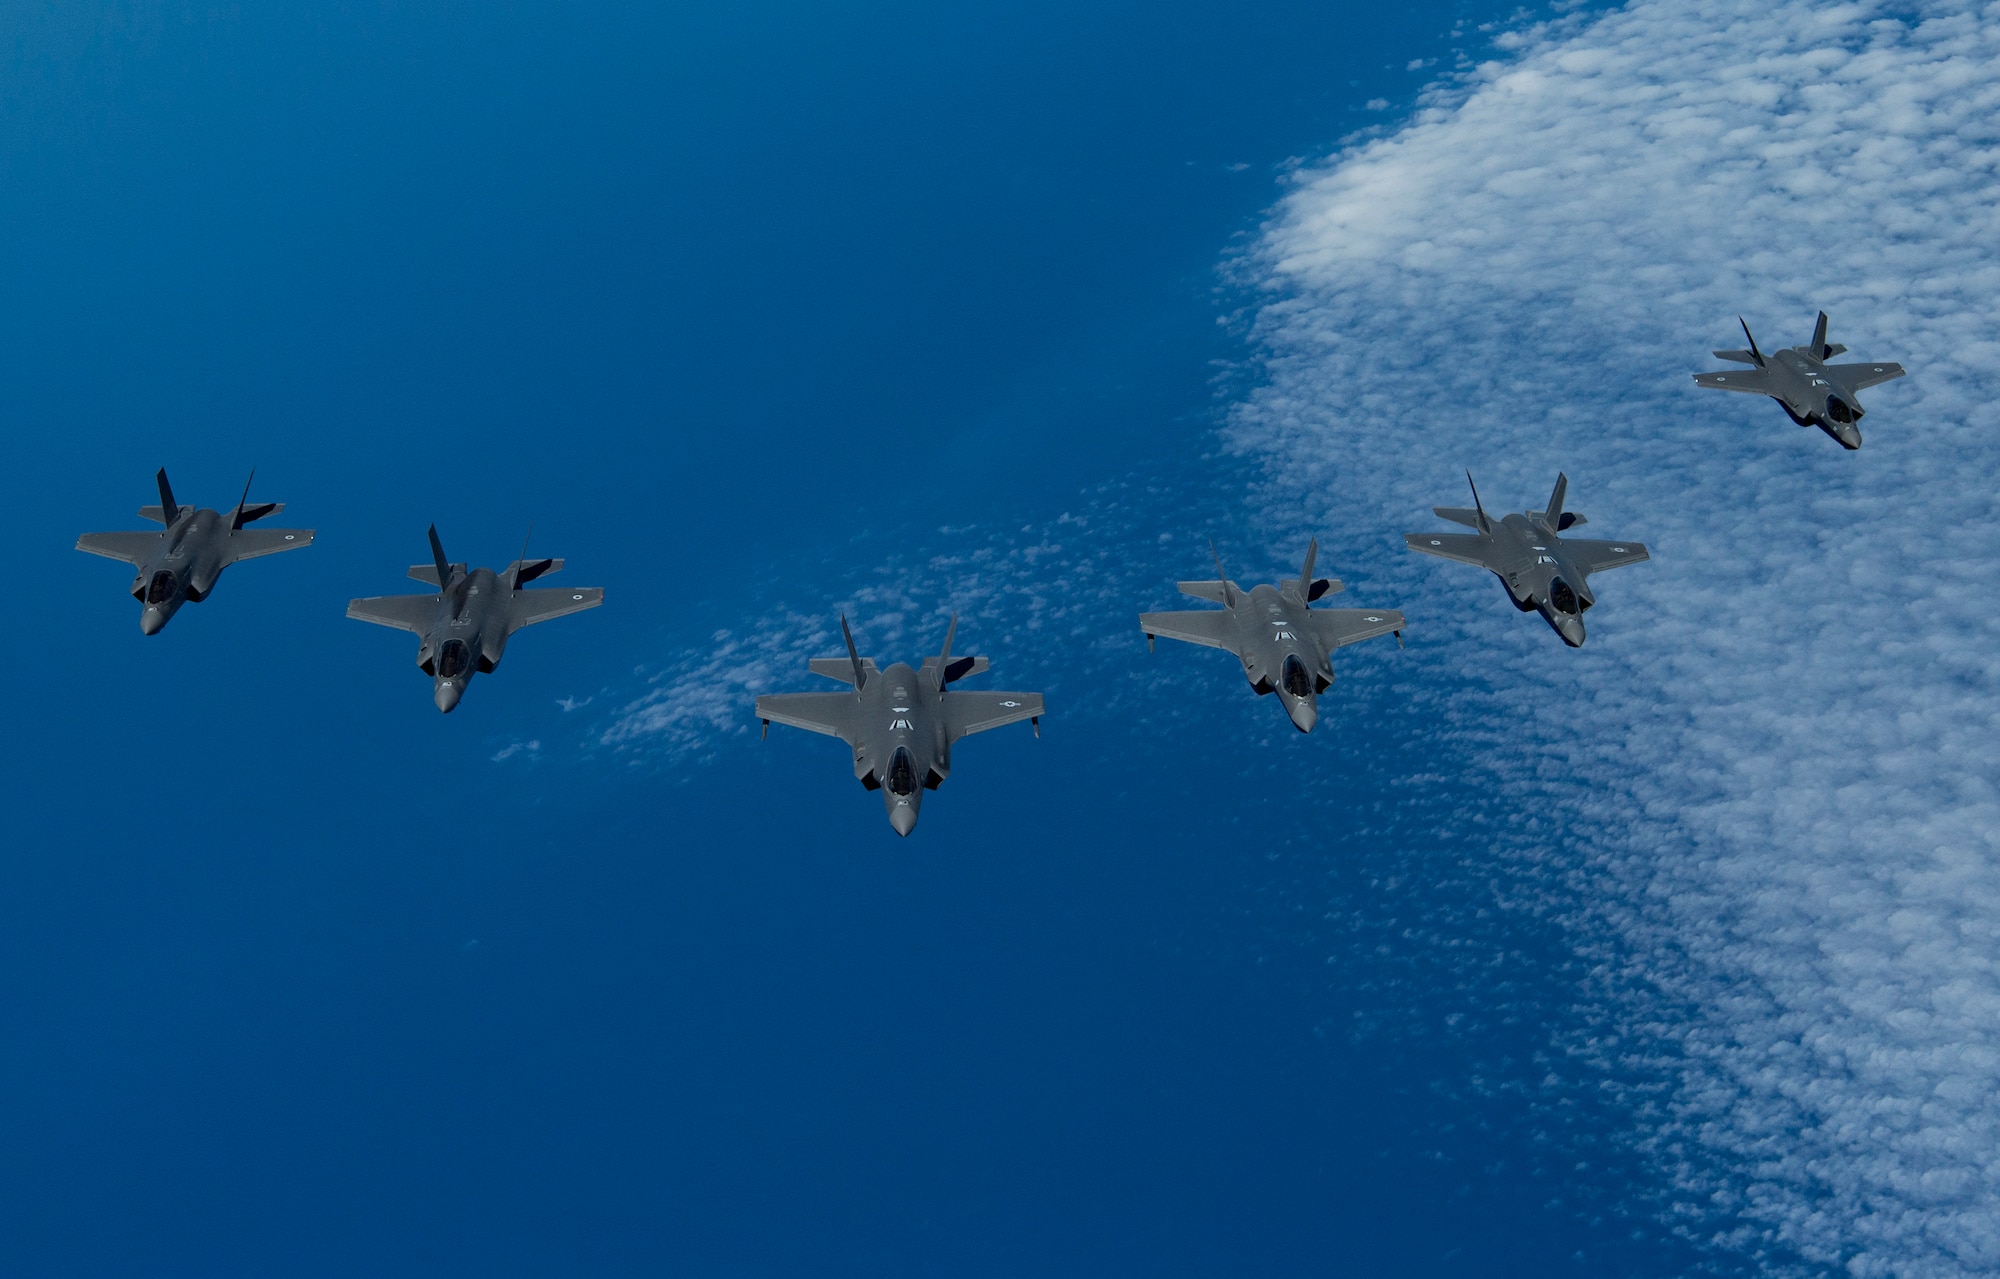 A photo of F-35's from the US, Israel and UK.